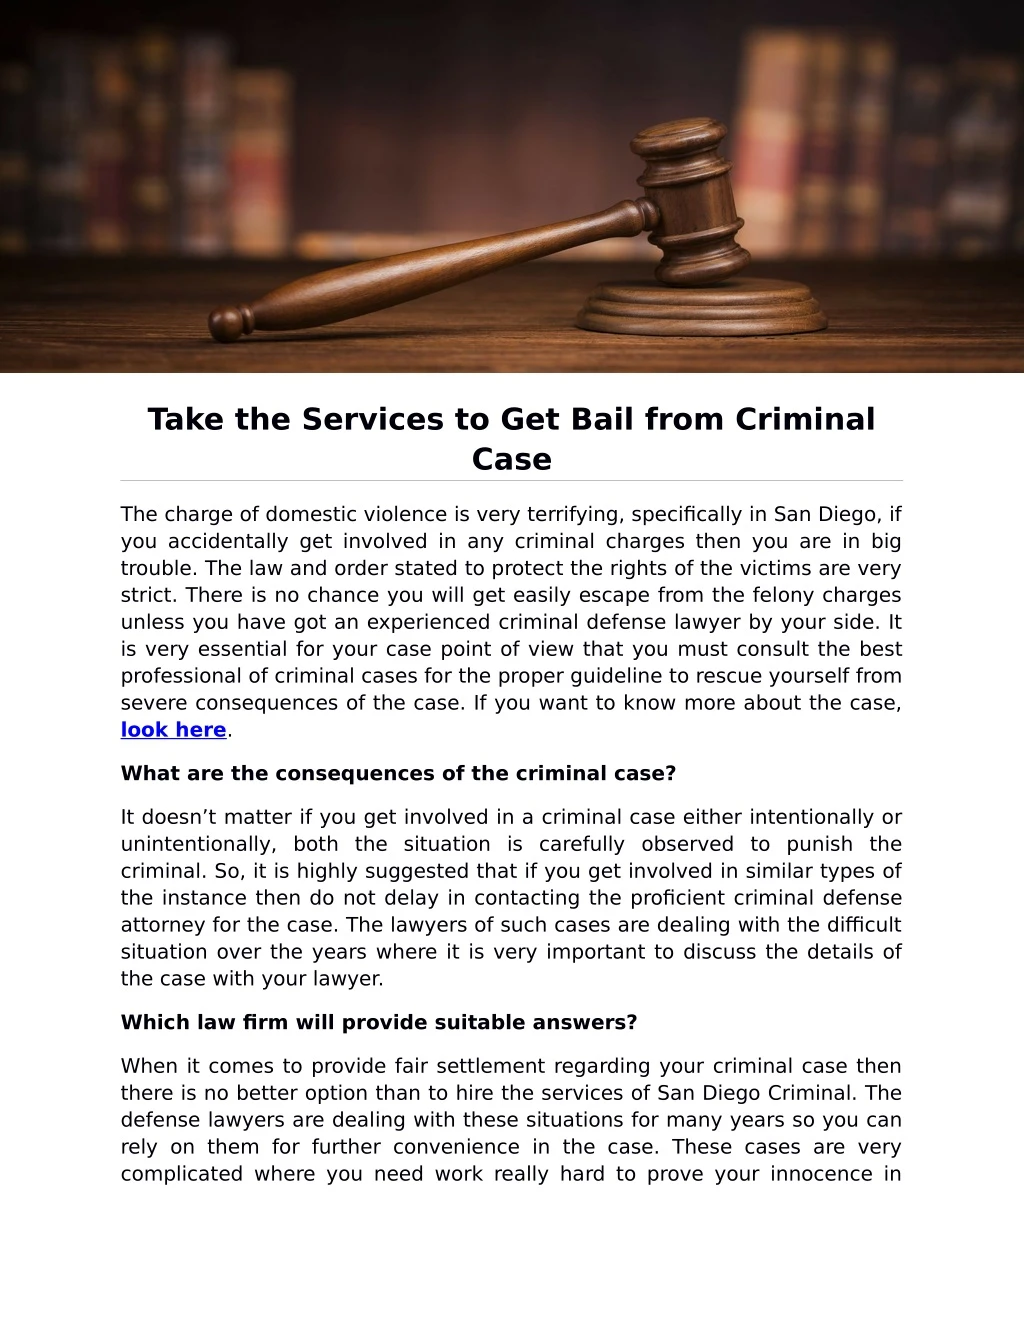 take the services to get bail from criminal case